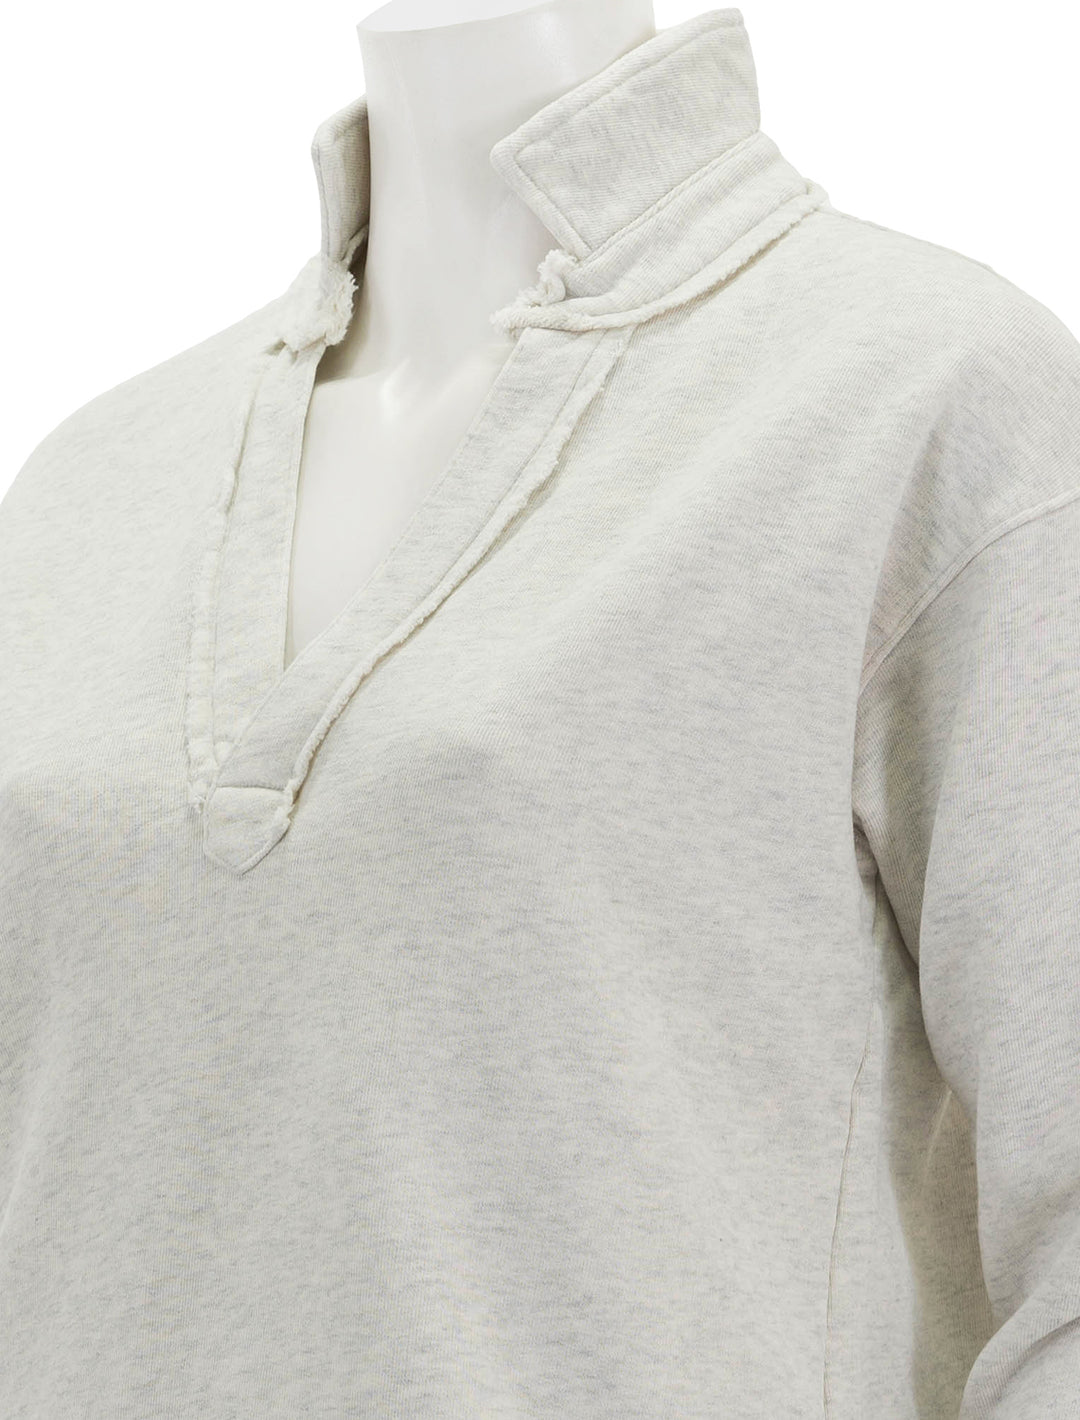 Close-up view of Frank & Eileen's patrick popover henley in light heather grey melange.